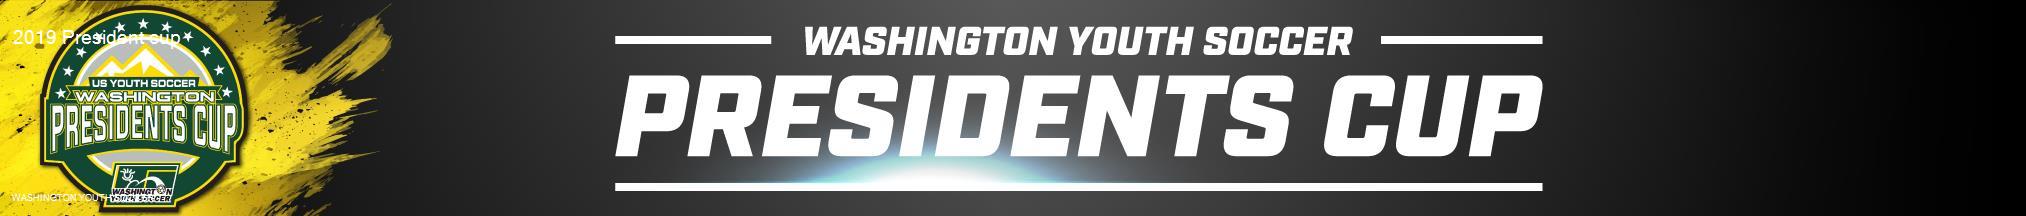 2019 Washington Youth Soccer President Cup banner